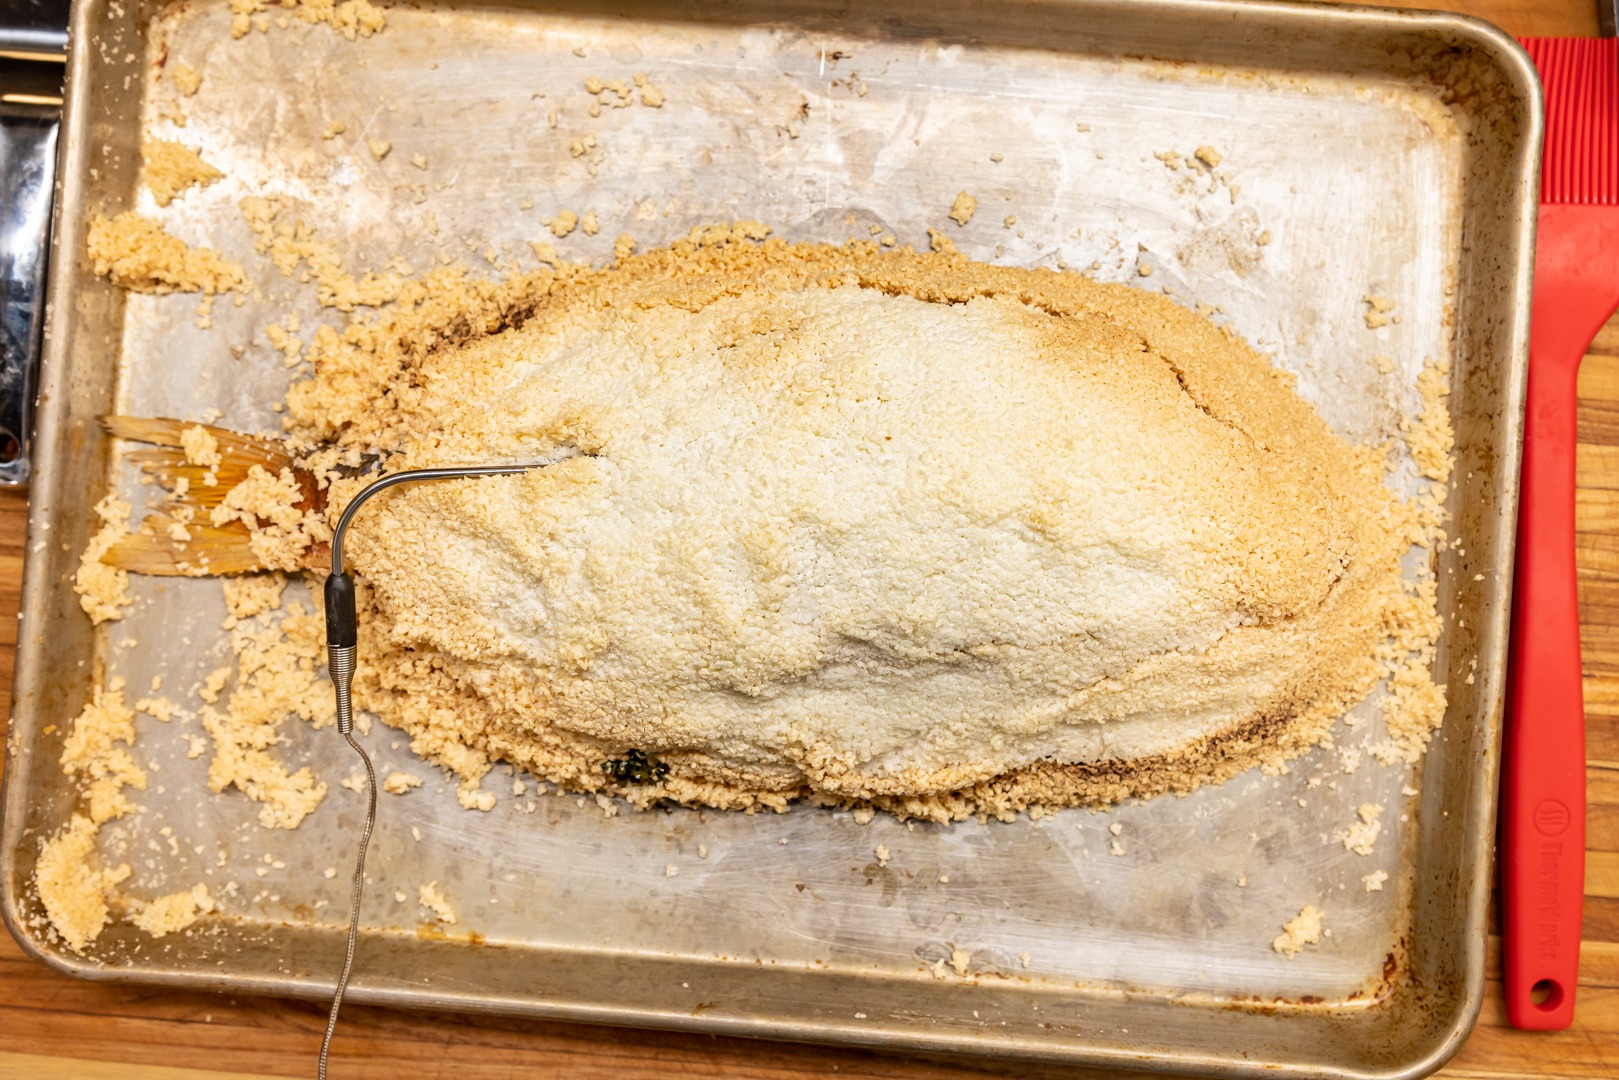 salt-crusted red snapper recipe and temps